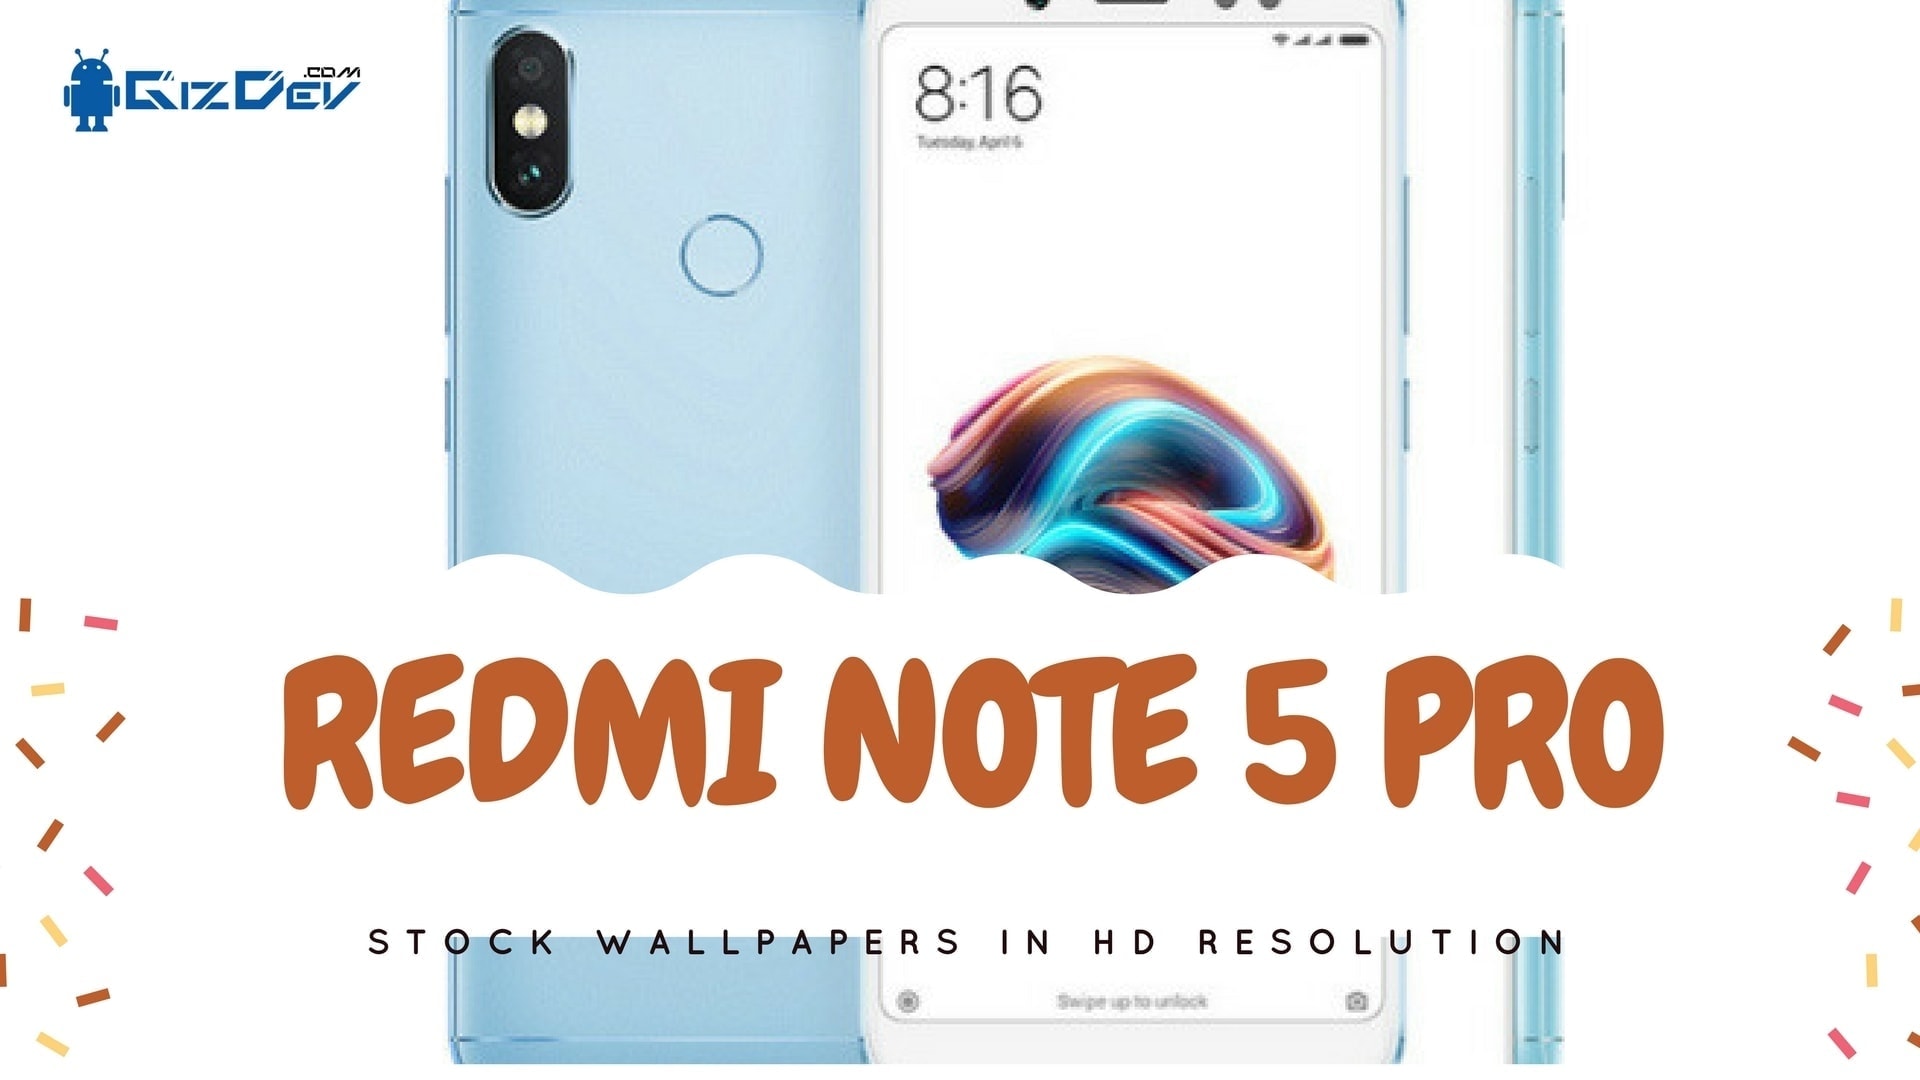 Download Exclusive Redmi Note 5 Pro Stock Wallpapers In HD Resolution